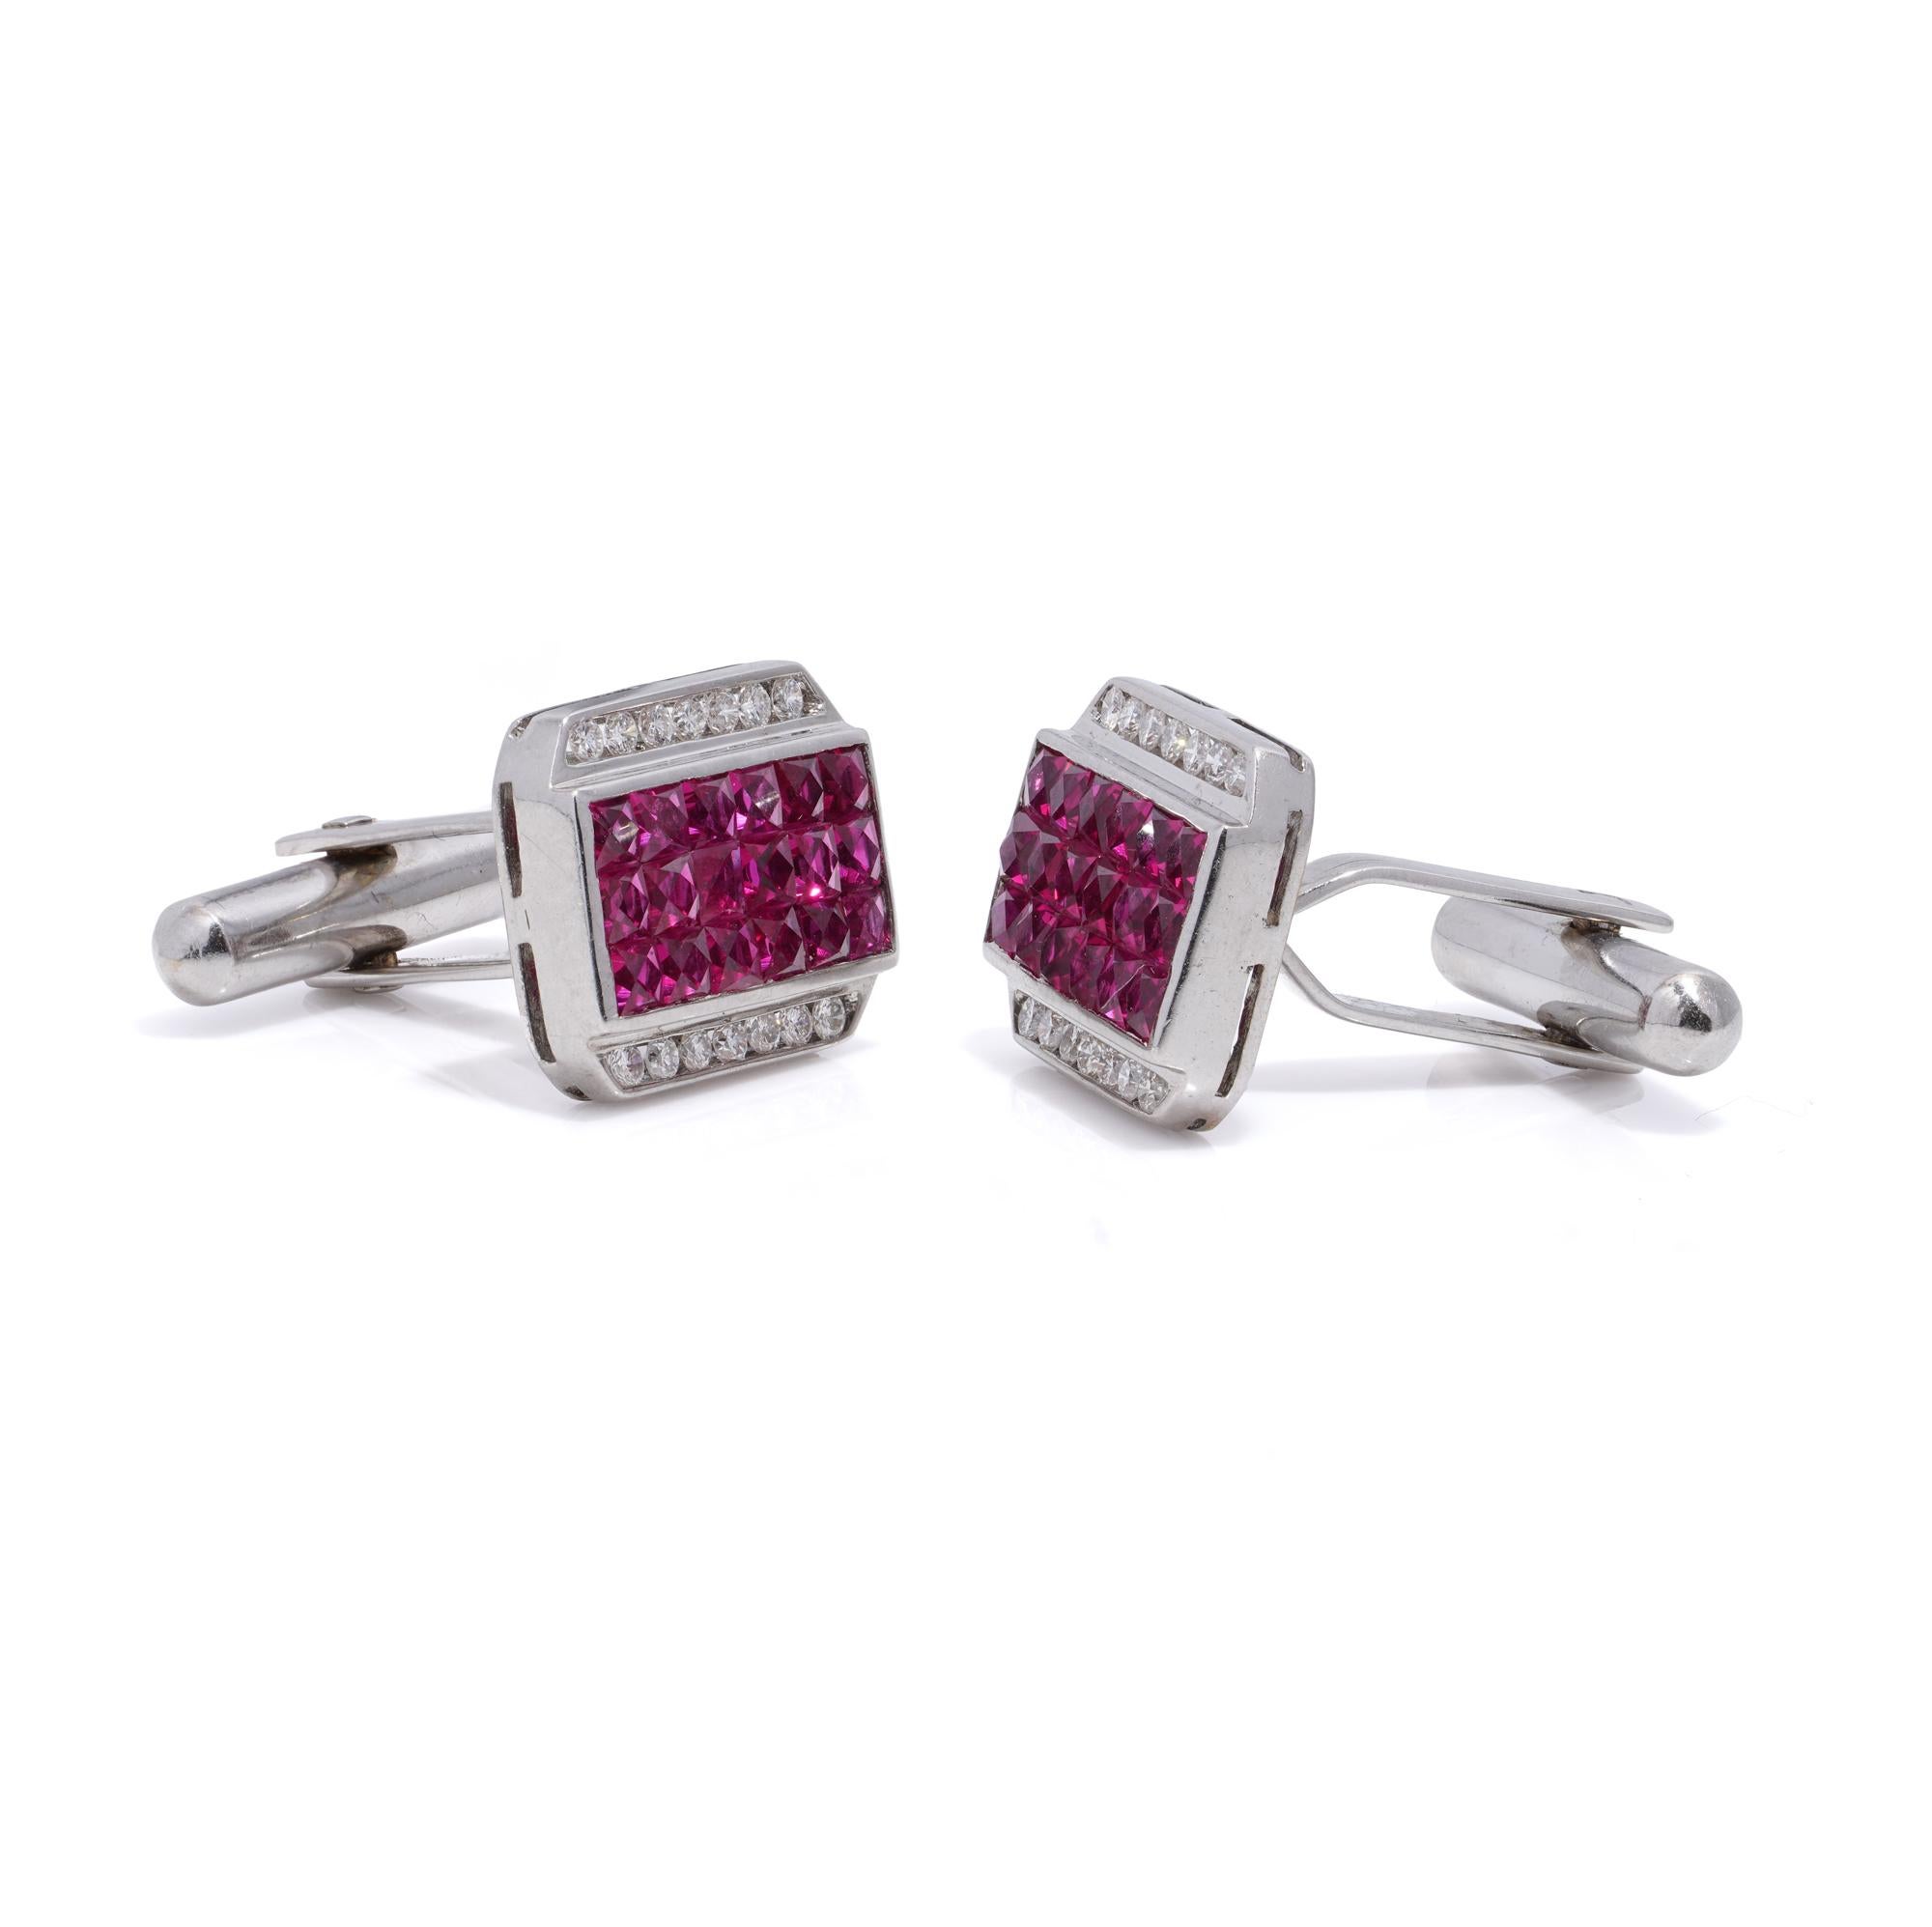 Elegant cufflinks crafted from 18kt white gold, adorned with French-cut rubies and diamonds. The rubies, arranged in central rows, are flanked above and below by glistening diamonds, creating a sophisticated and stylish accessory.

Dimensions -